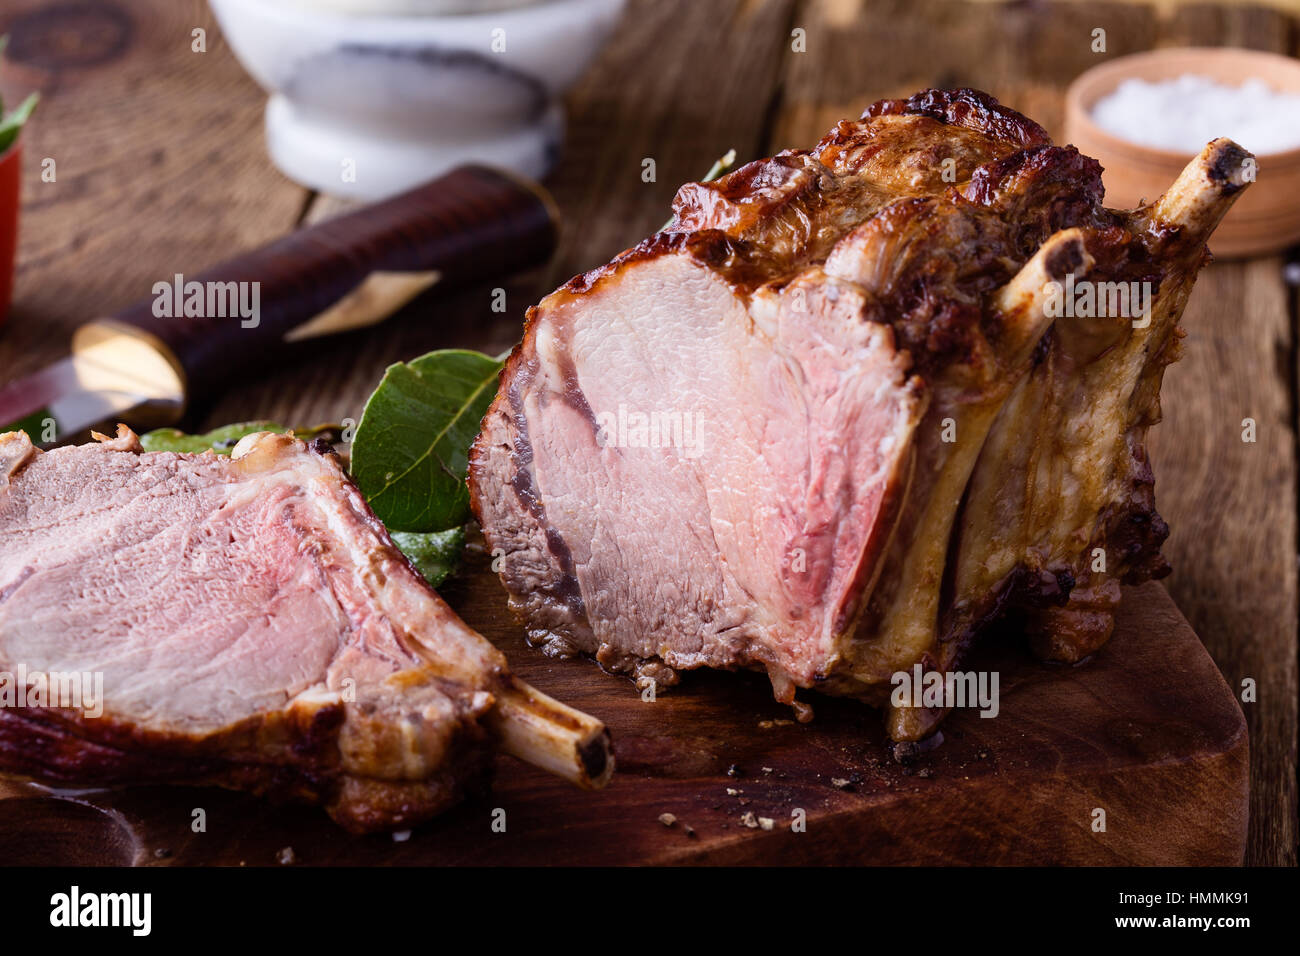 Homemade bone-in prime rib roast on rustic wooden table Stock Photo